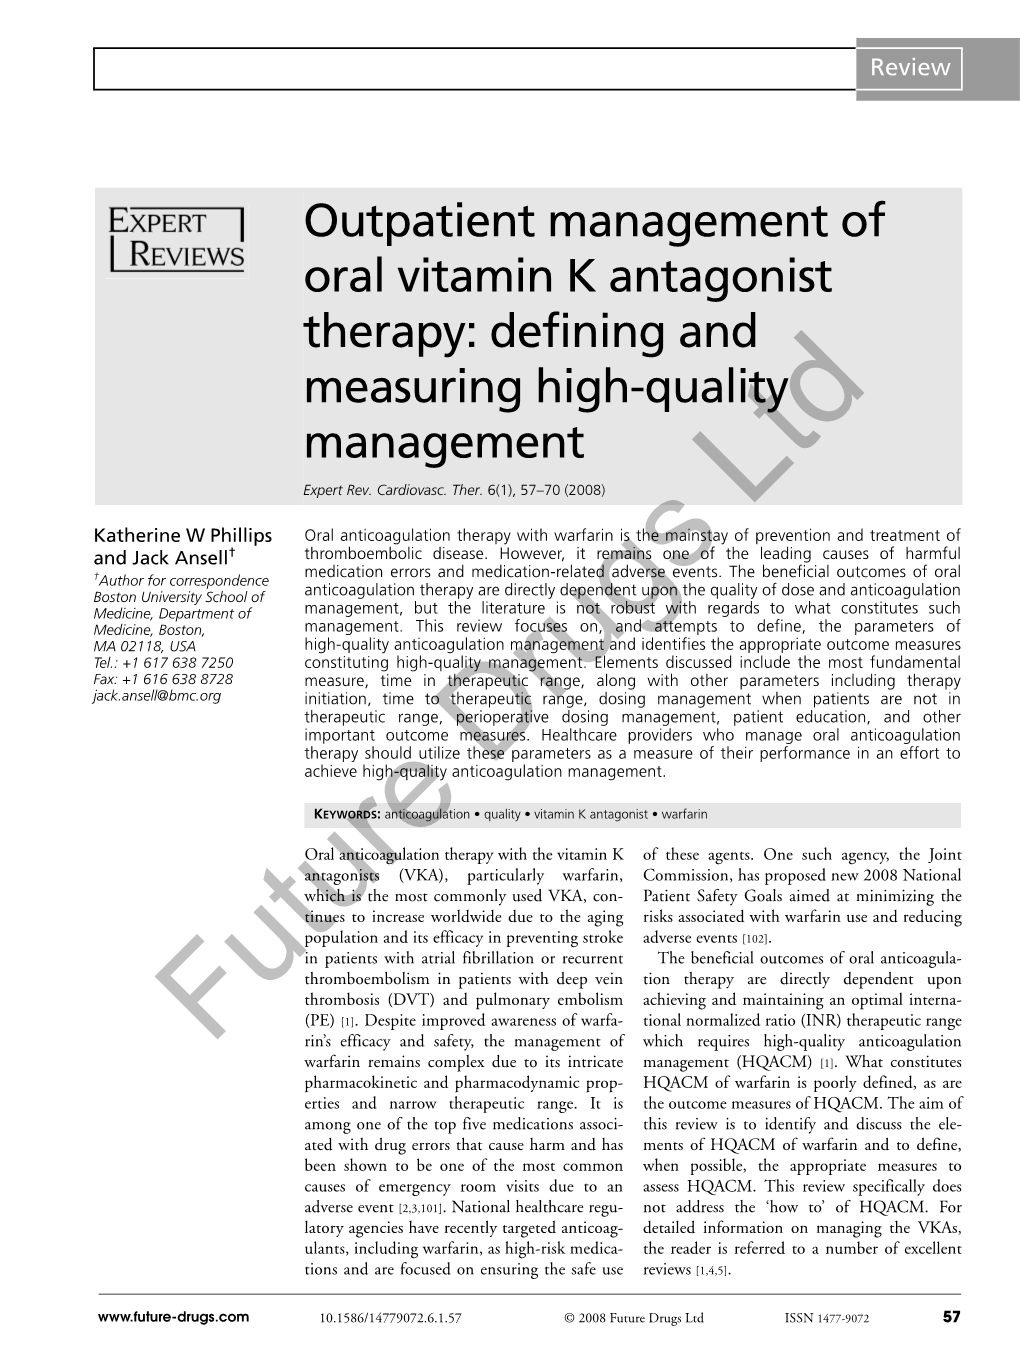 Outpatient Management of Oral Vitamin K Antagonist Therapy: Defining and Measuring High-Quality Management